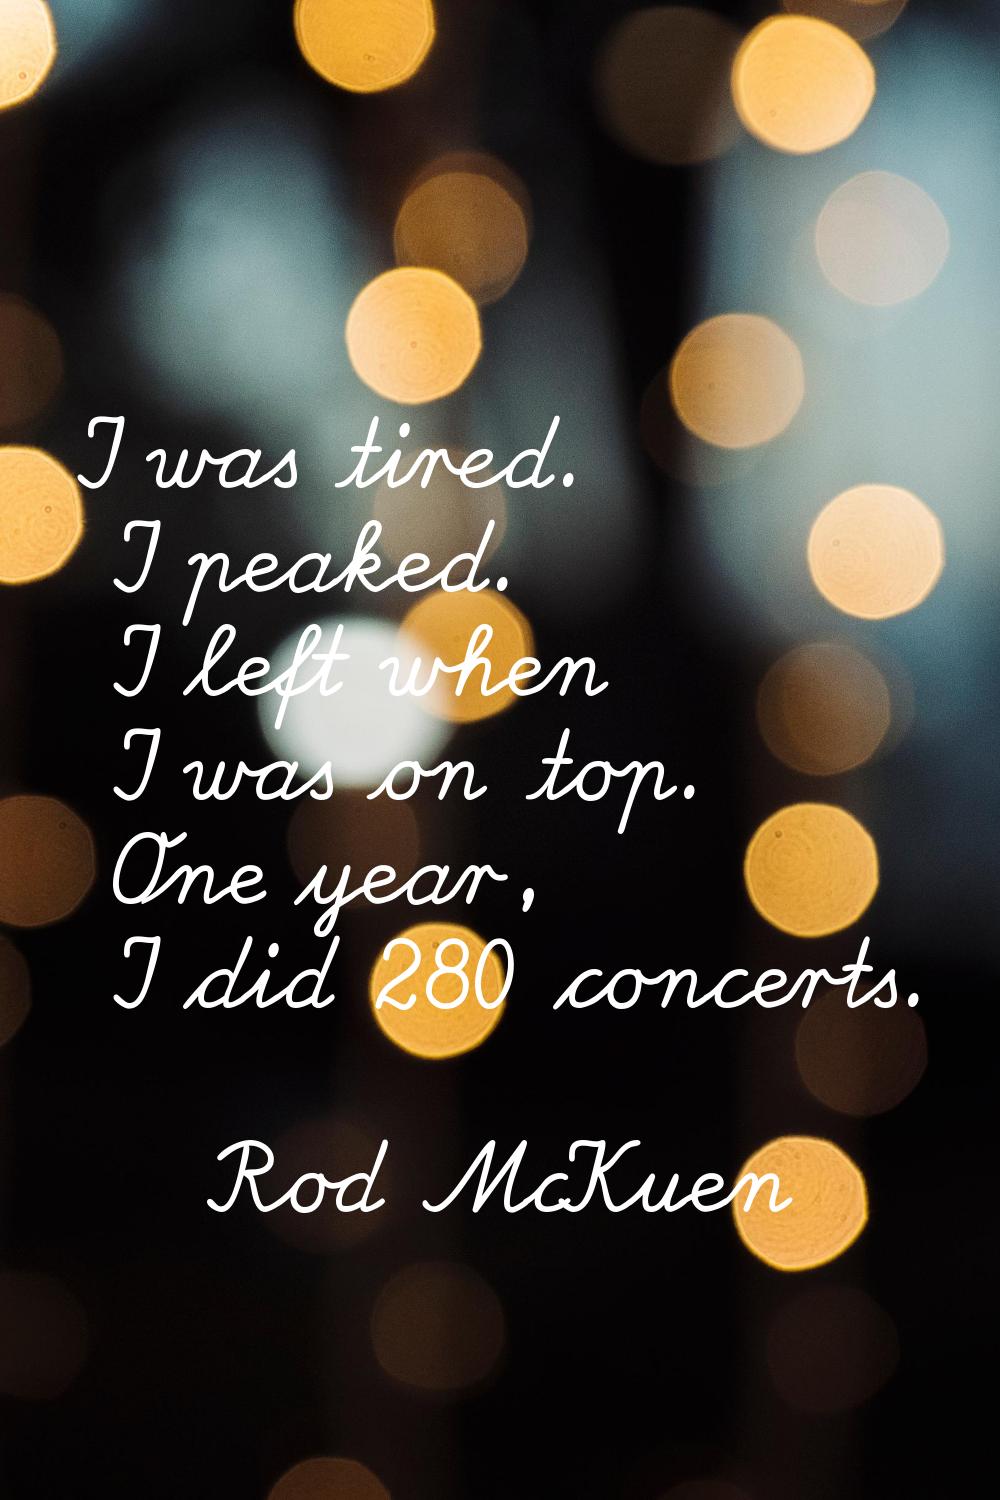 I was tired. I peaked. I left when I was on top. One year, I did 280 concerts.